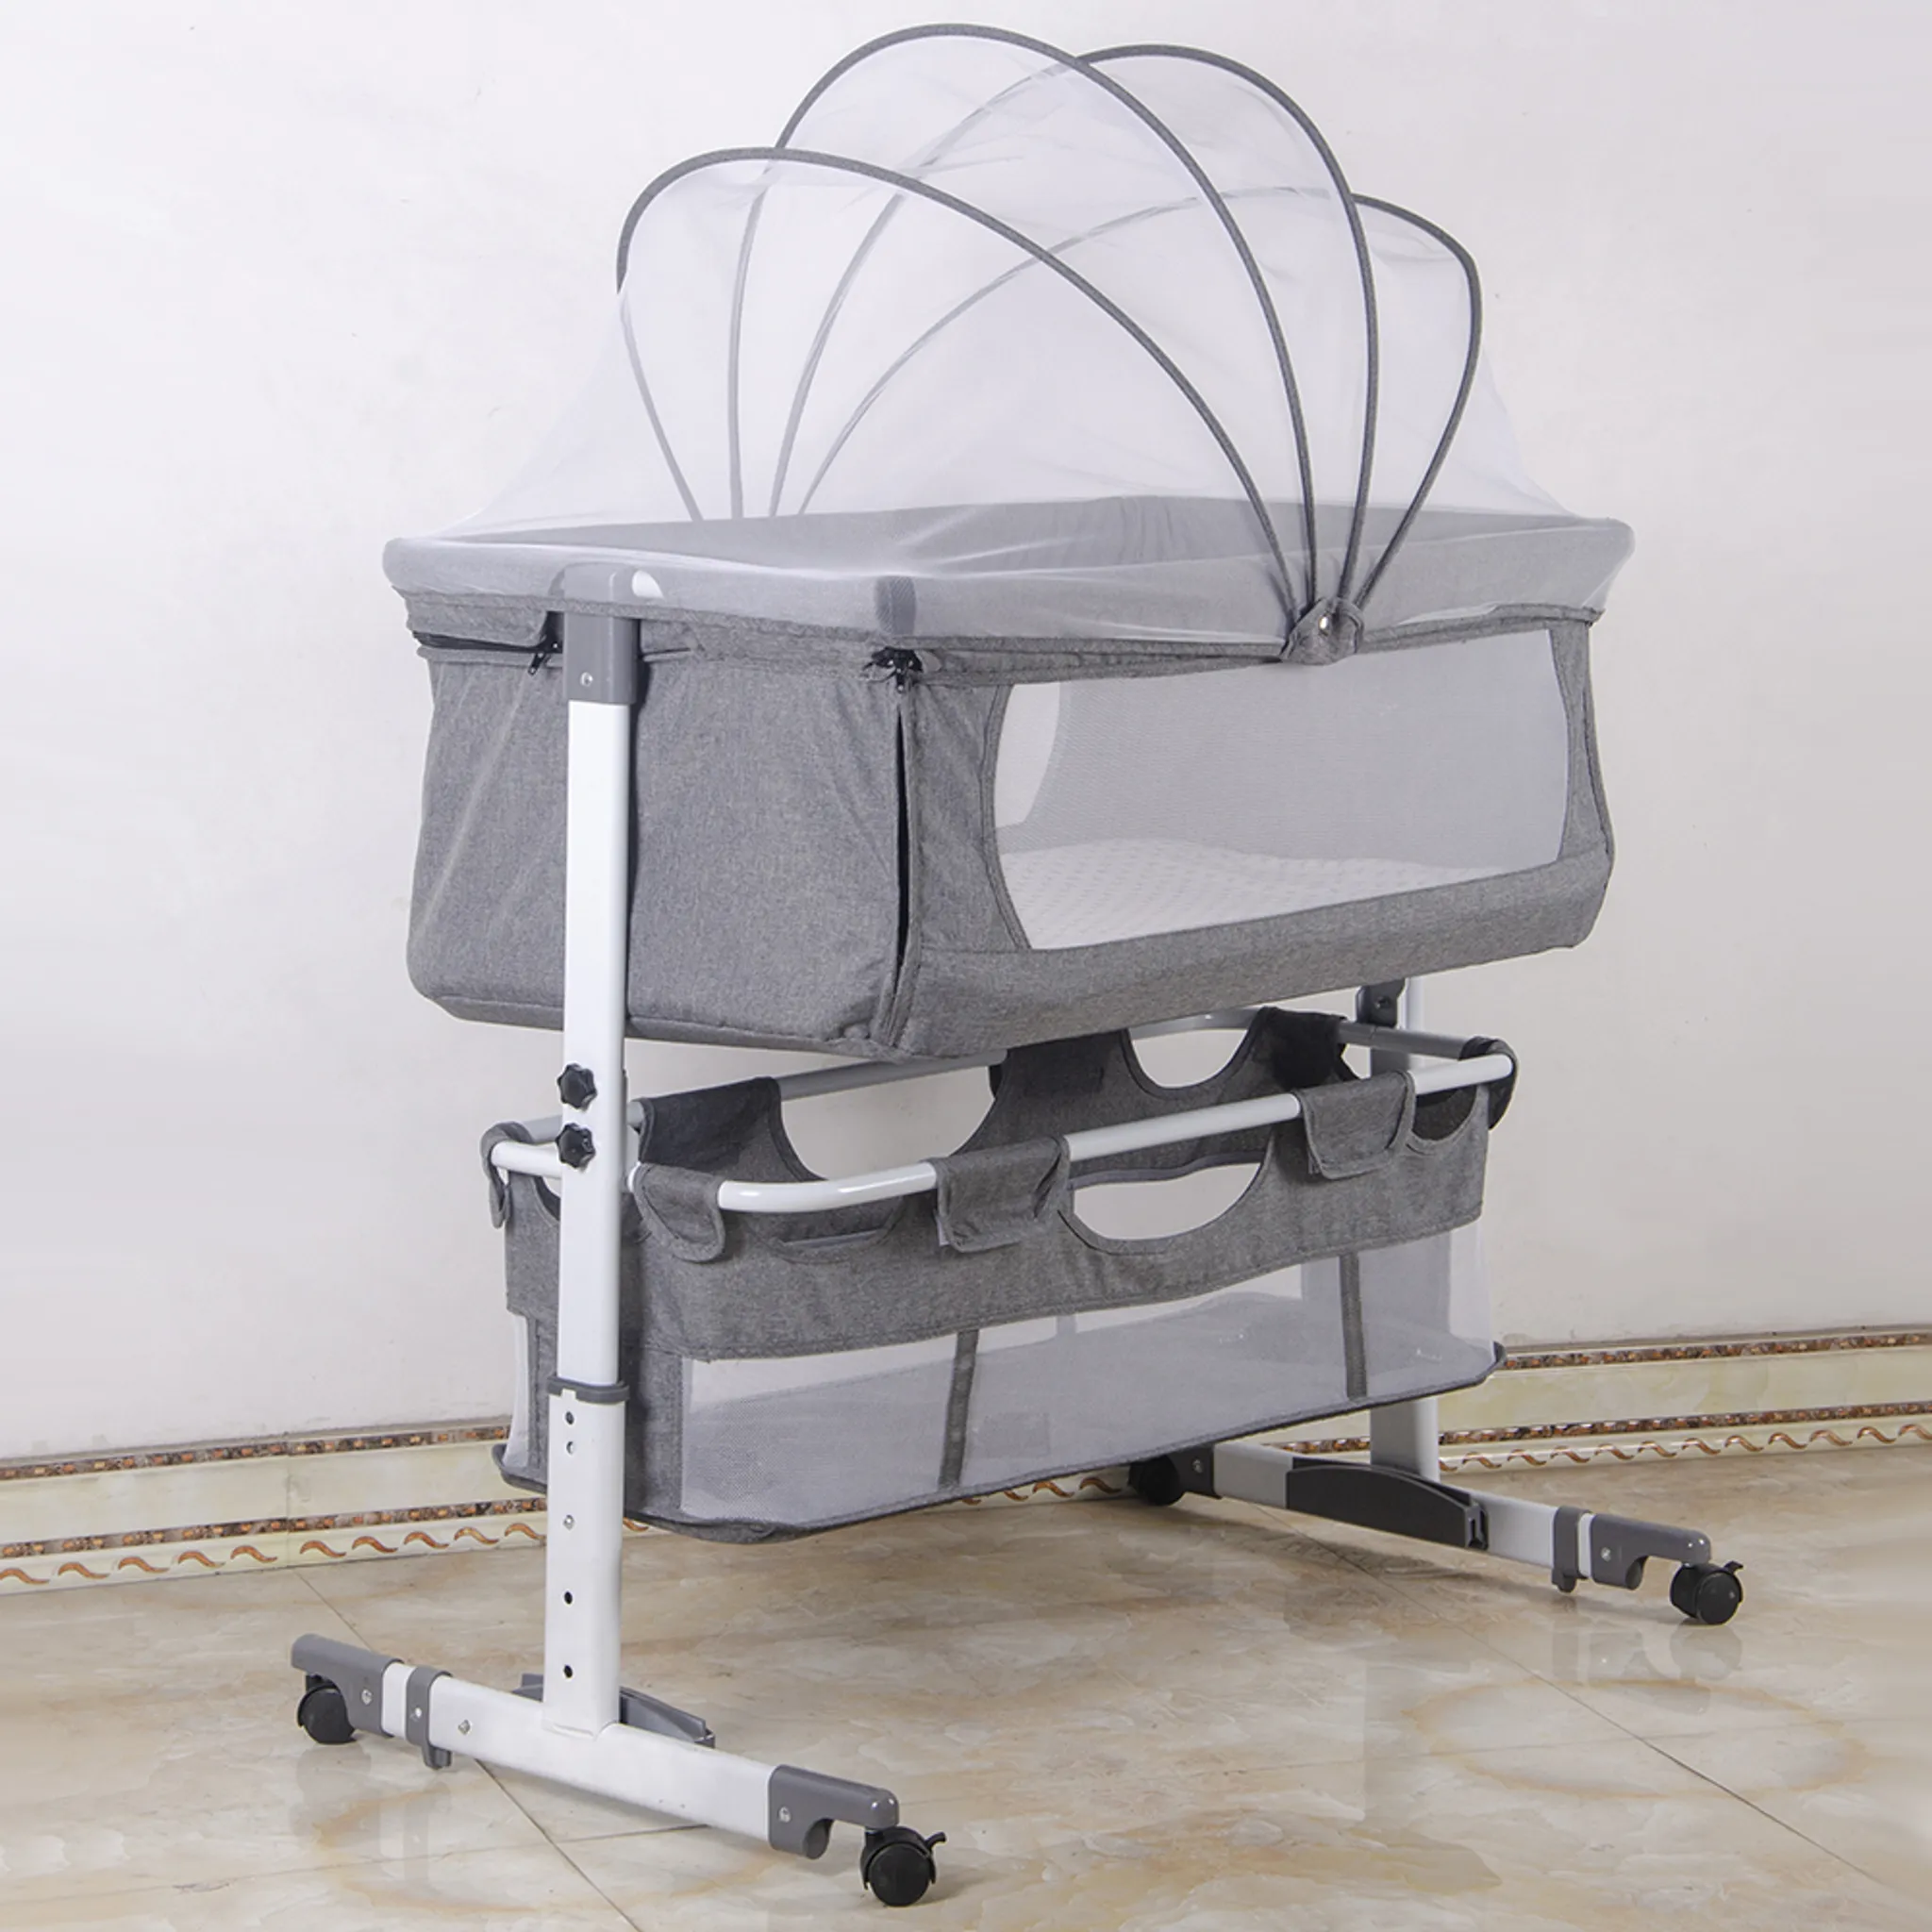 kaufland.de | bassinet side bed foldable height adjustable with wheels mosquito net